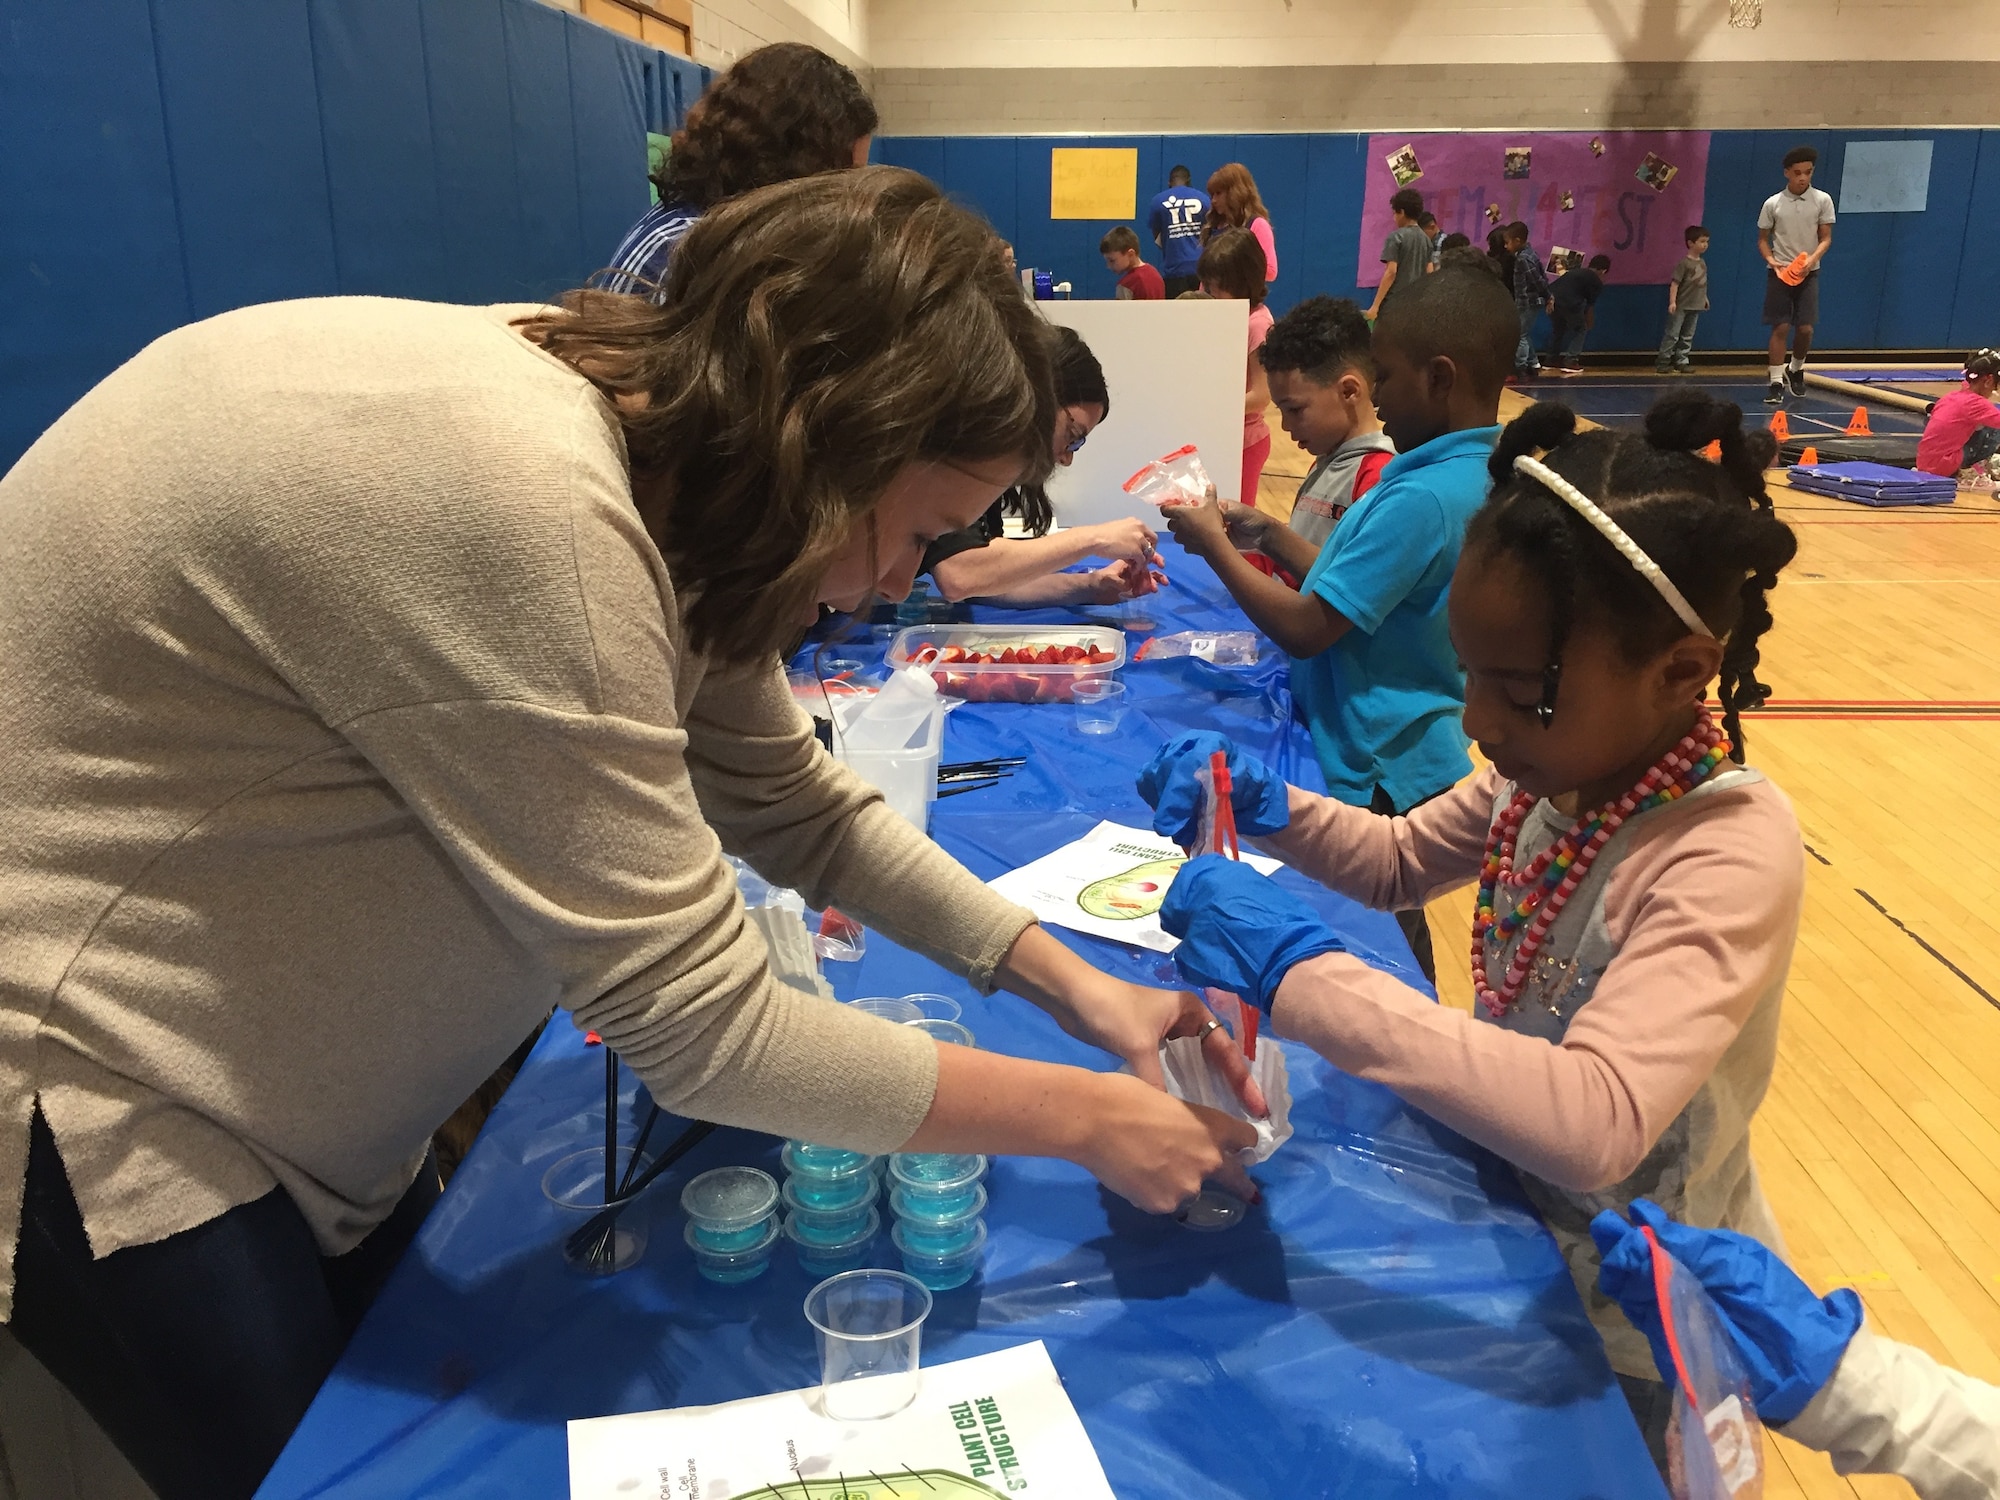 Christina Davis, student research assistant with the 711th Human Performance Wing, Air Force Research Laboratory, assists a student with identifying plant cell structures by extracting visible DNA from crushed and strained strawberries during STEMfest 3.14.  (Skywrighter photo/Amy Rollins)